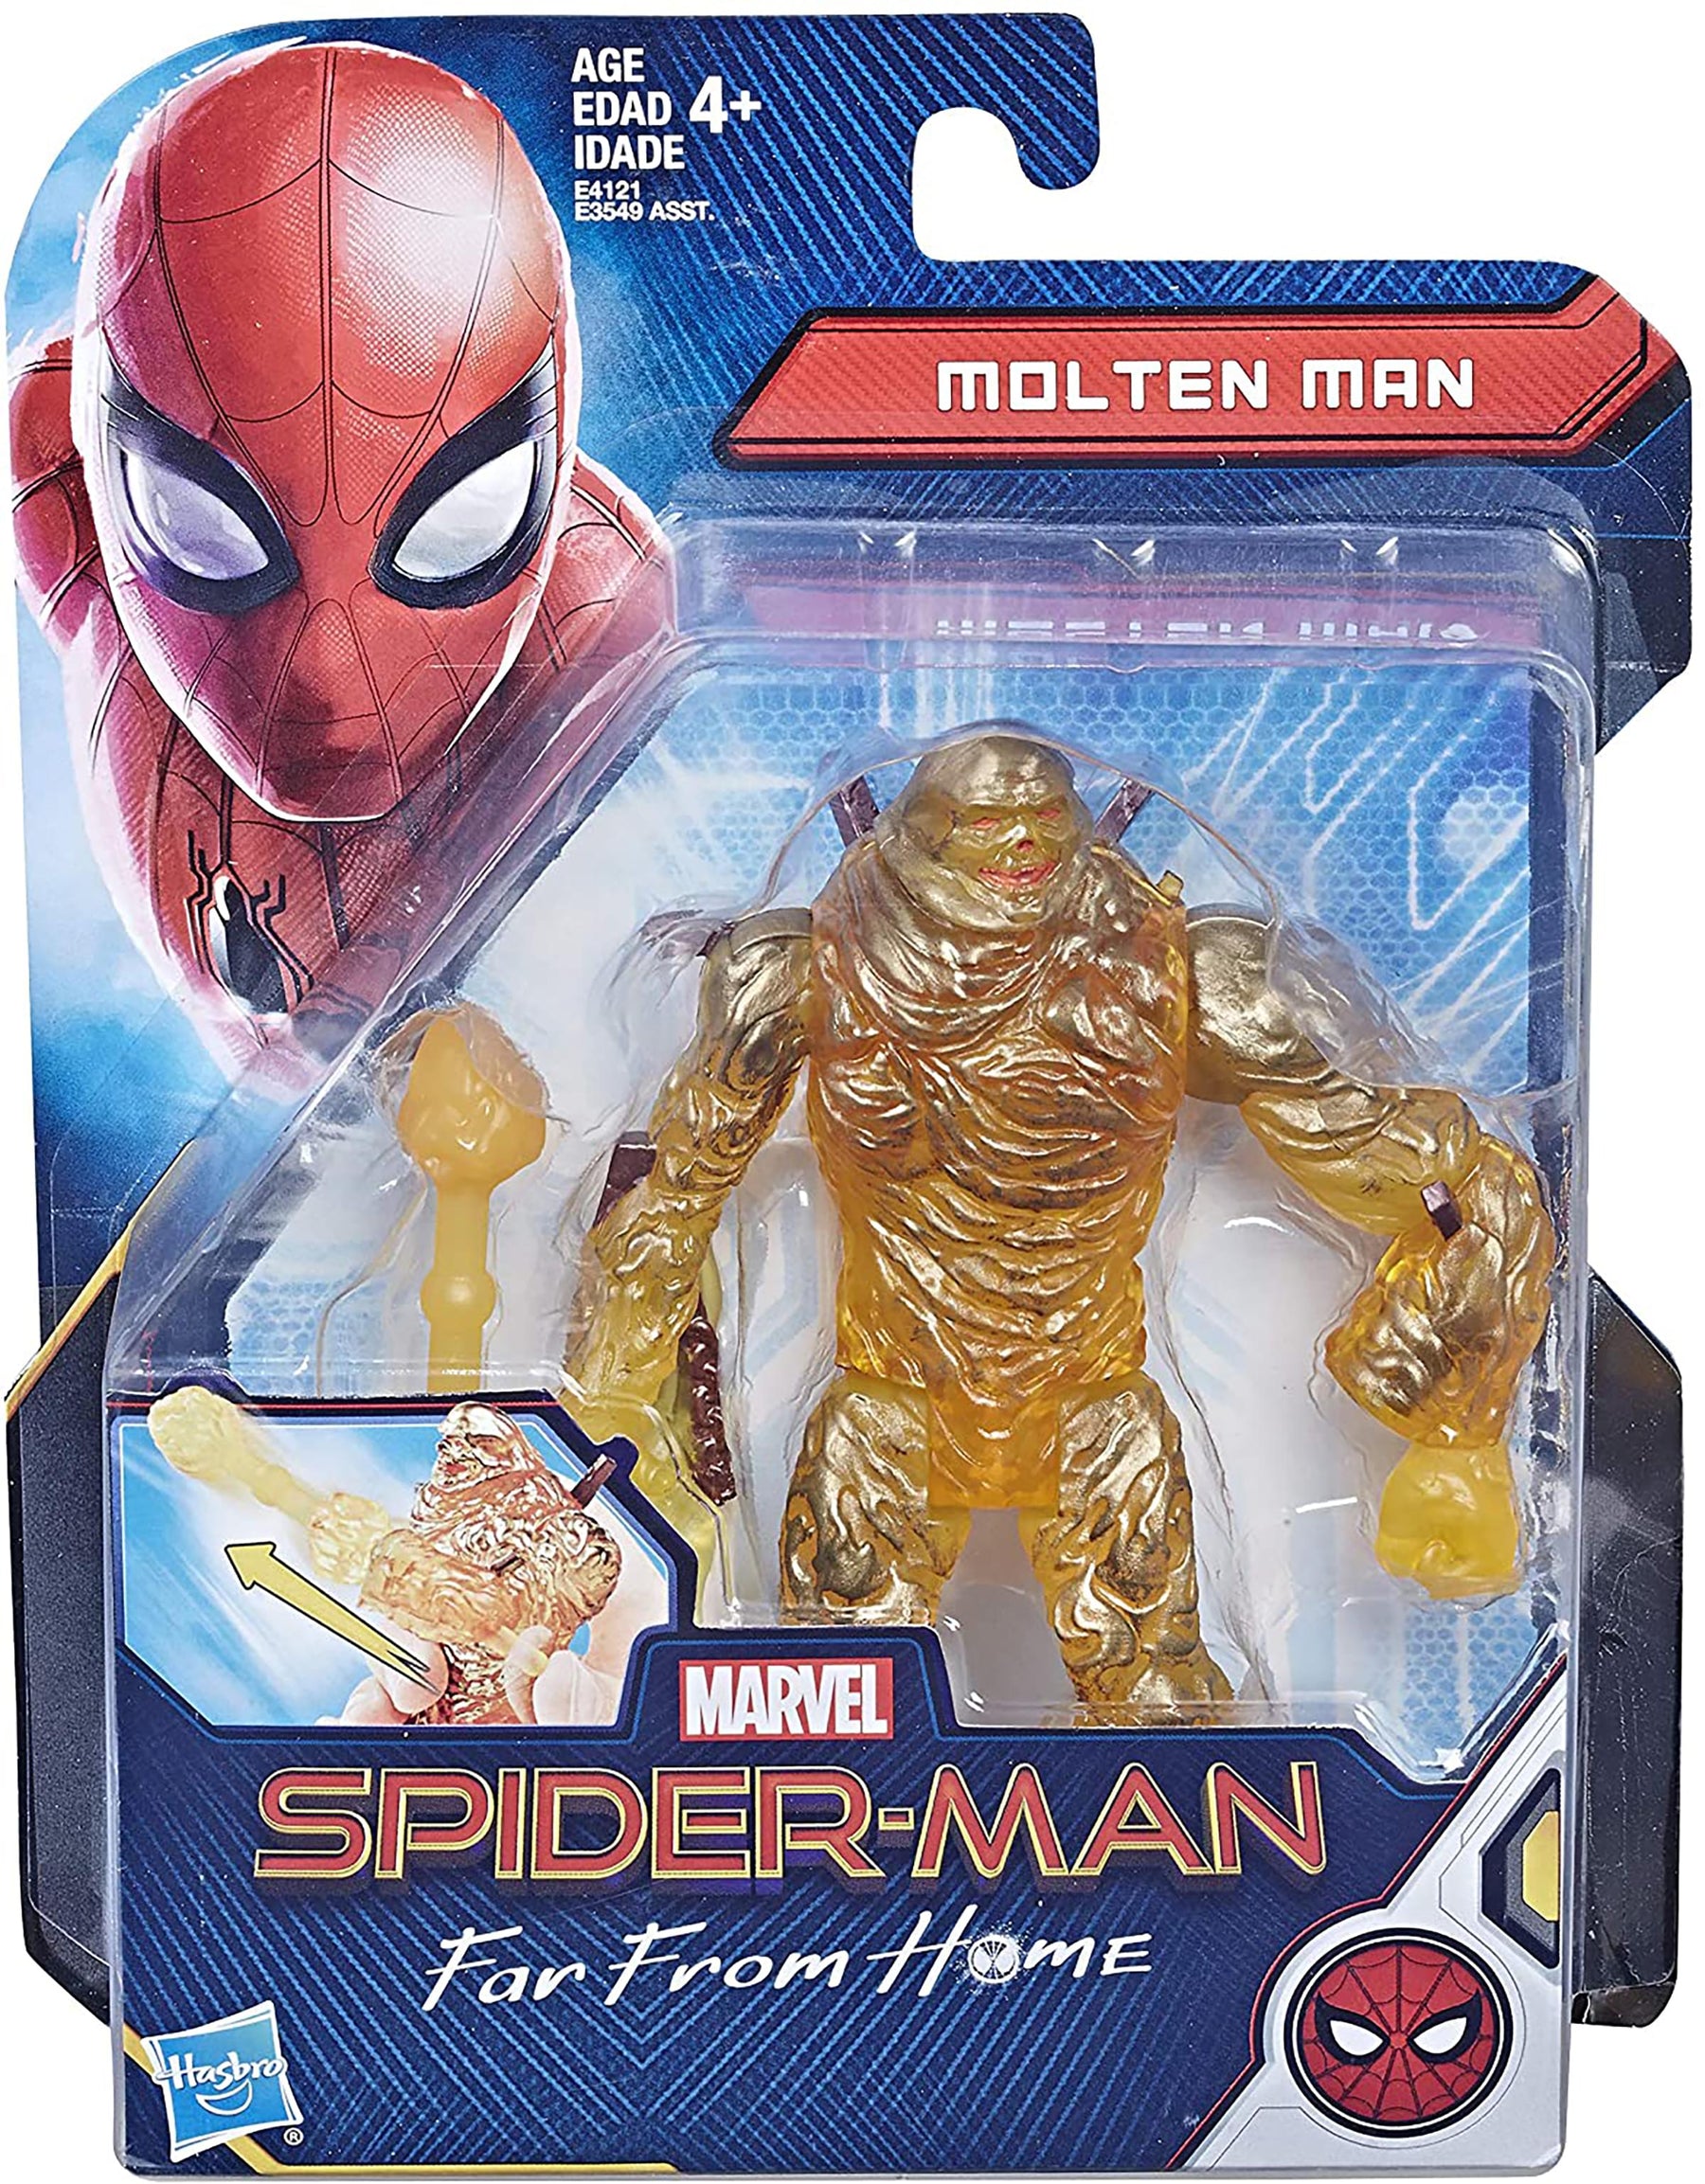 Marvel Spider-Man Far From Home 6 Inch Action Figure | Molten Man